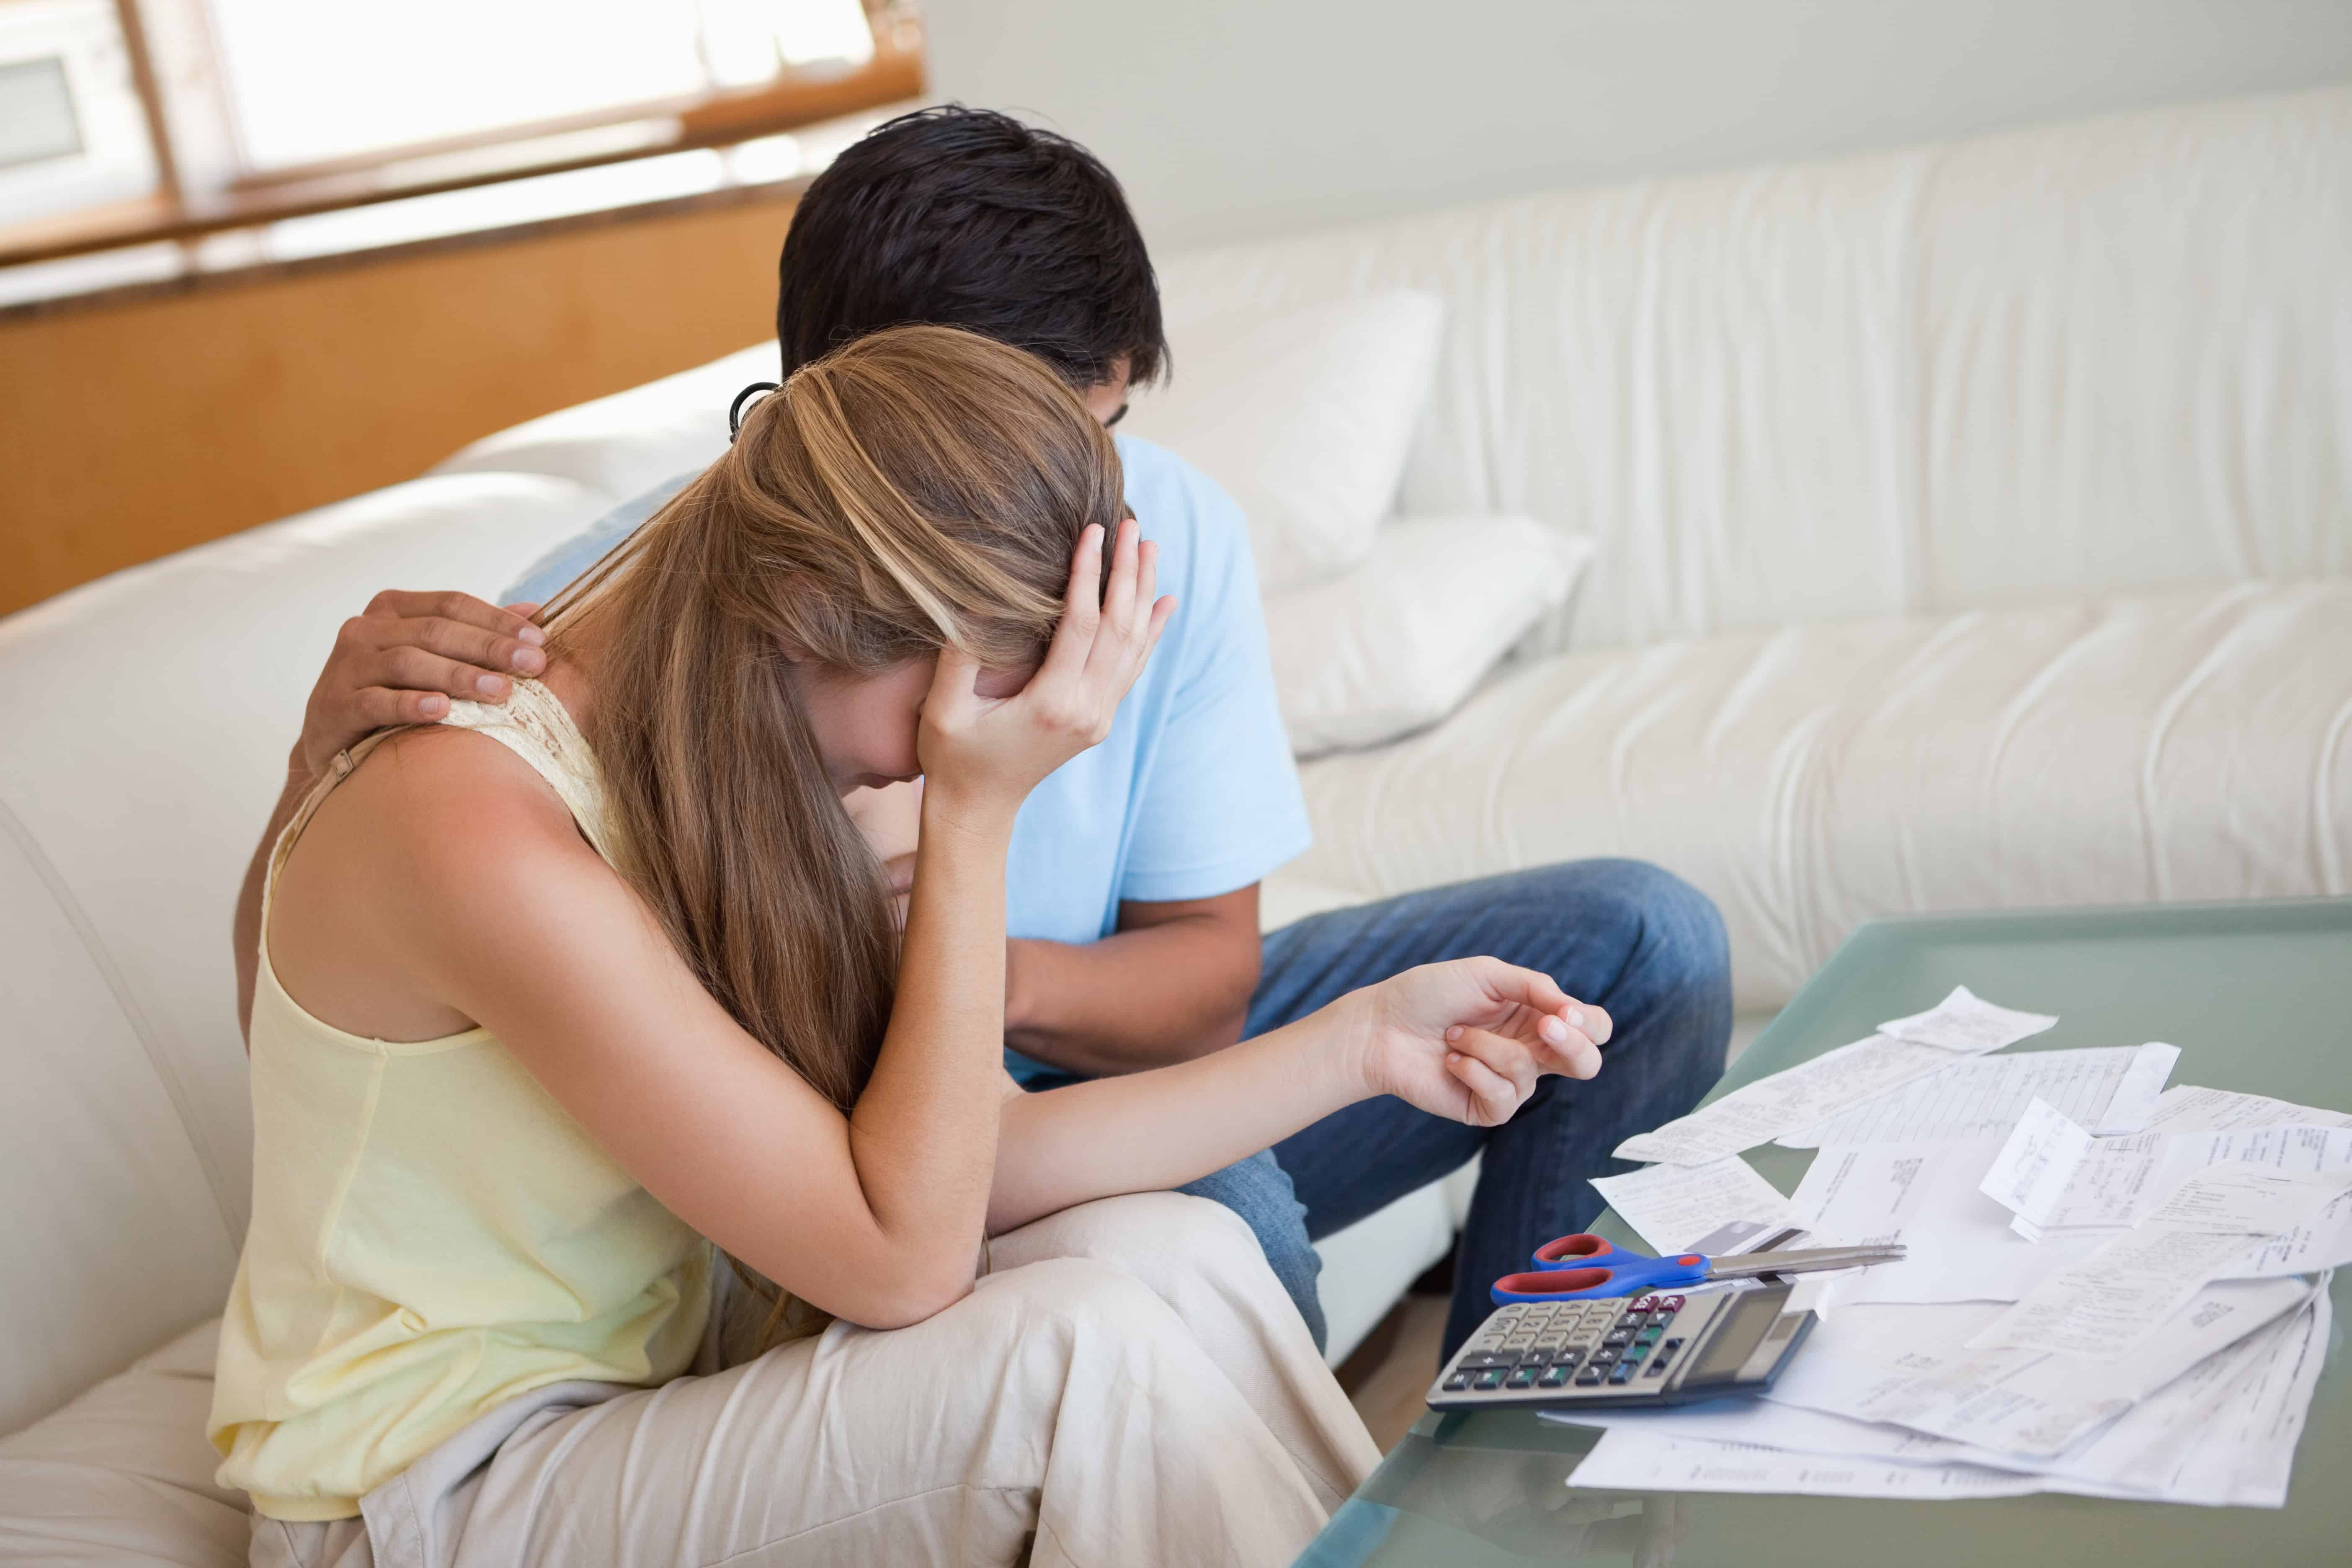 work and money issues can be destroying your marriage